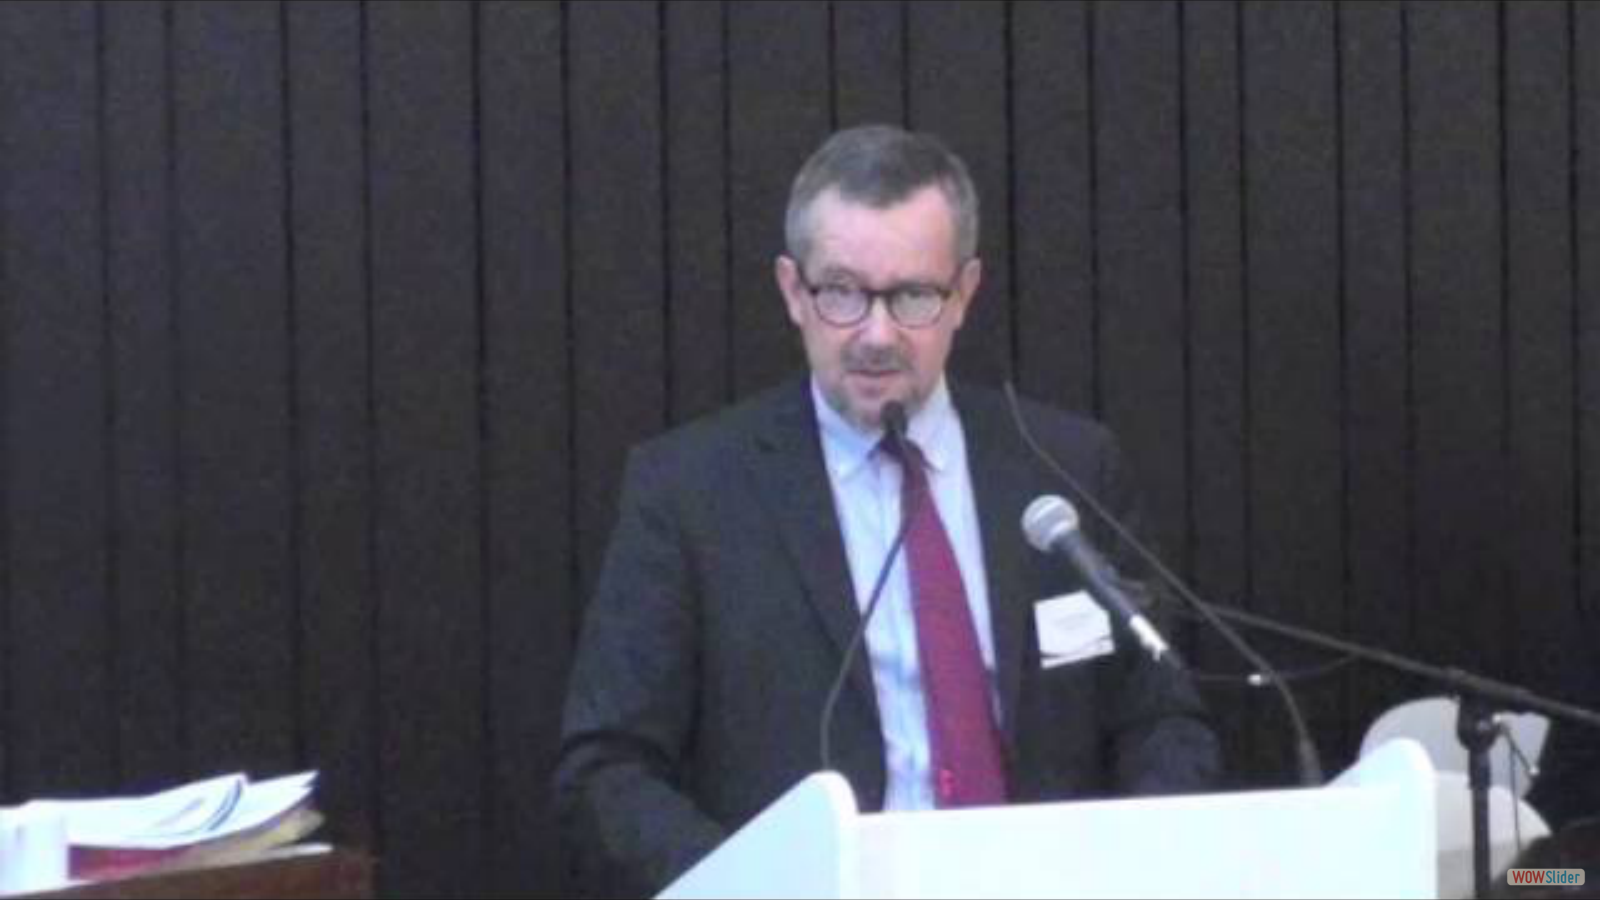 Speech by Christophe Nijdam, QED Annual Conference, September 2015